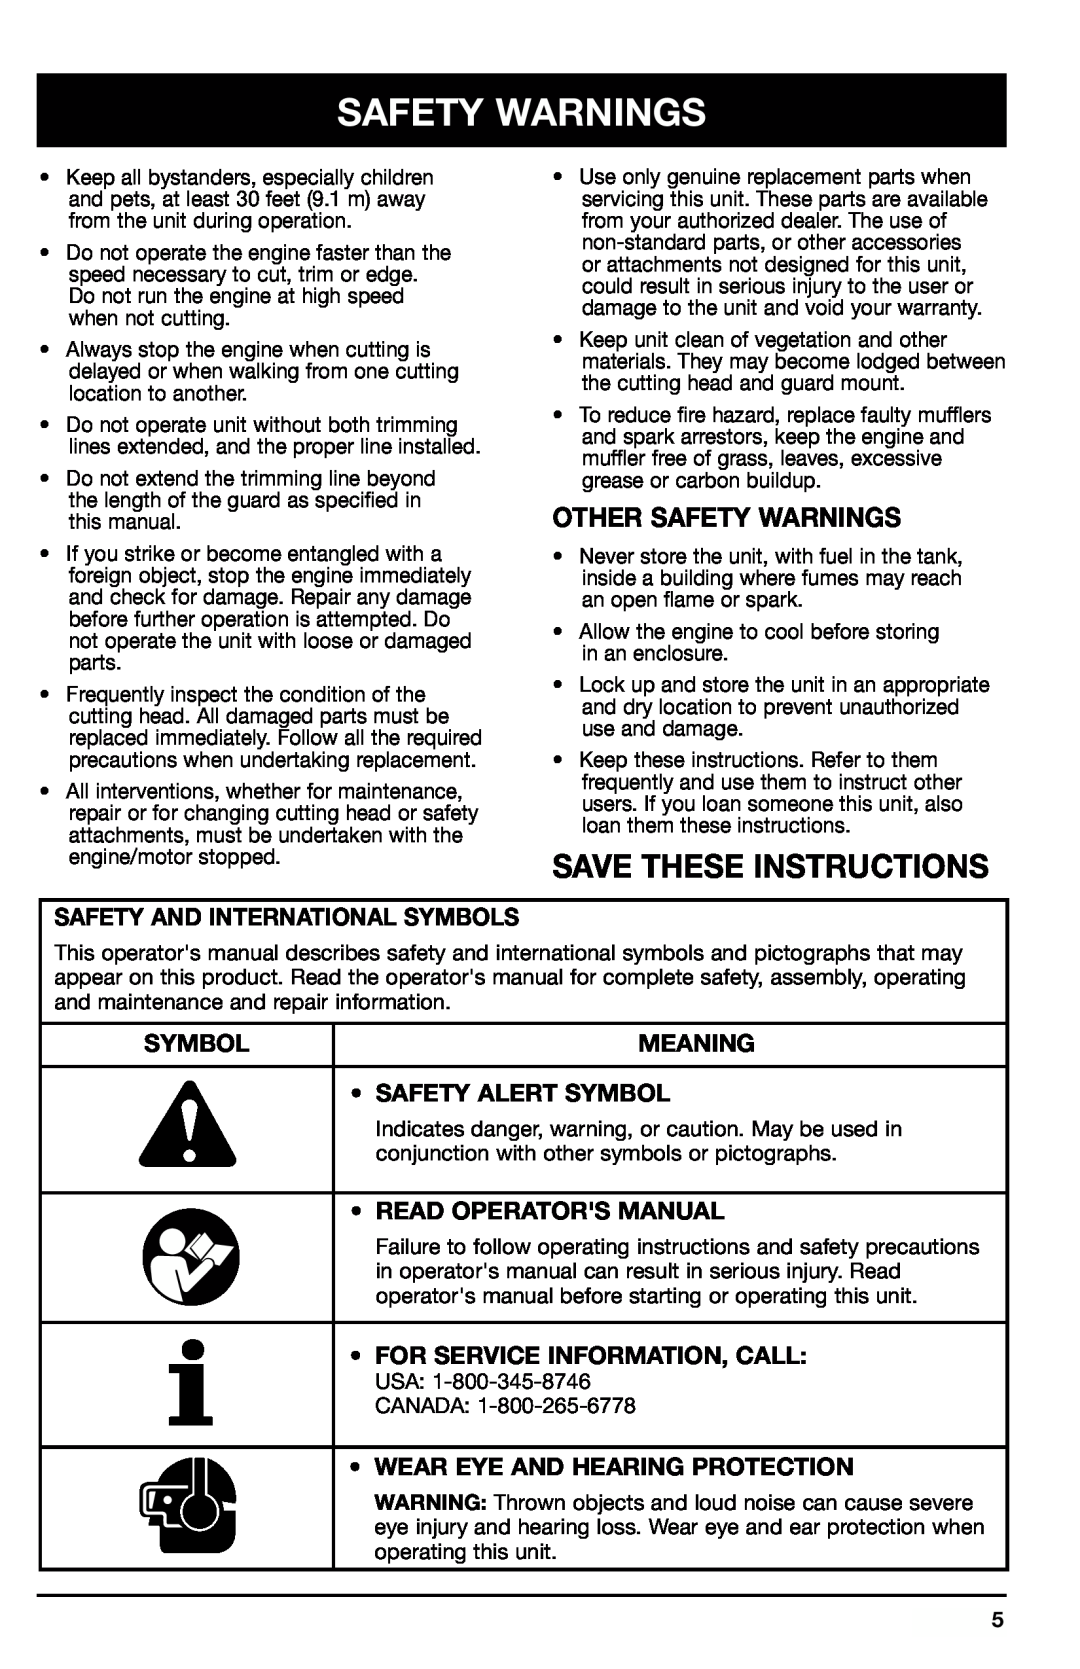 Ryobi 2075r Save These Instructions, Other Safety Warnings, Safety And International Symbols, Meaning, Safety Alert Symbol 